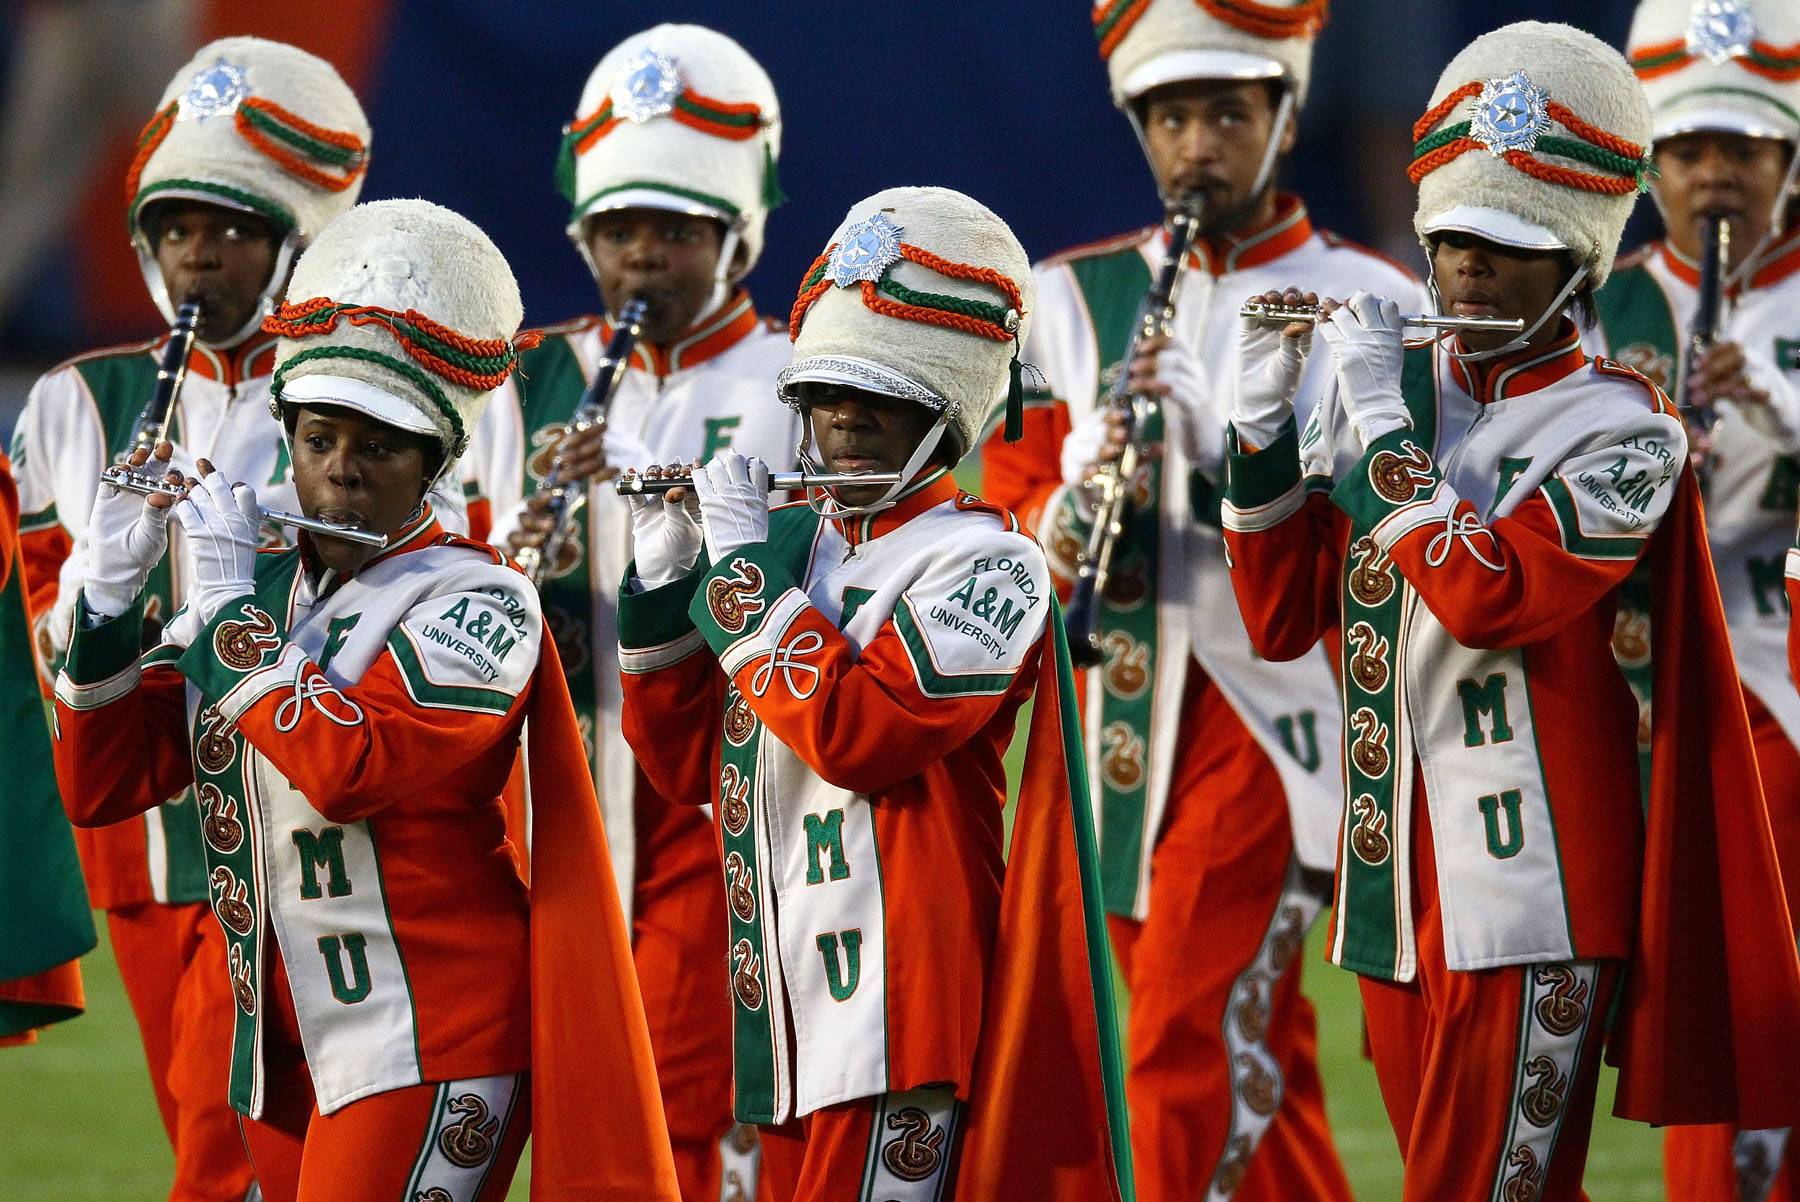 FAMU Band Suspended Until 2013 - Sporting events at Florida A&amp;M University will be without the distinctive sound of their marching band as the school announced the band will be suspended for another school year amid the ongoing hazing controversy revolving around the death of Robert Champion in November 2011.&nbsp;&nbsp;&nbsp;(Photo: Win McNamee/Getty Images)